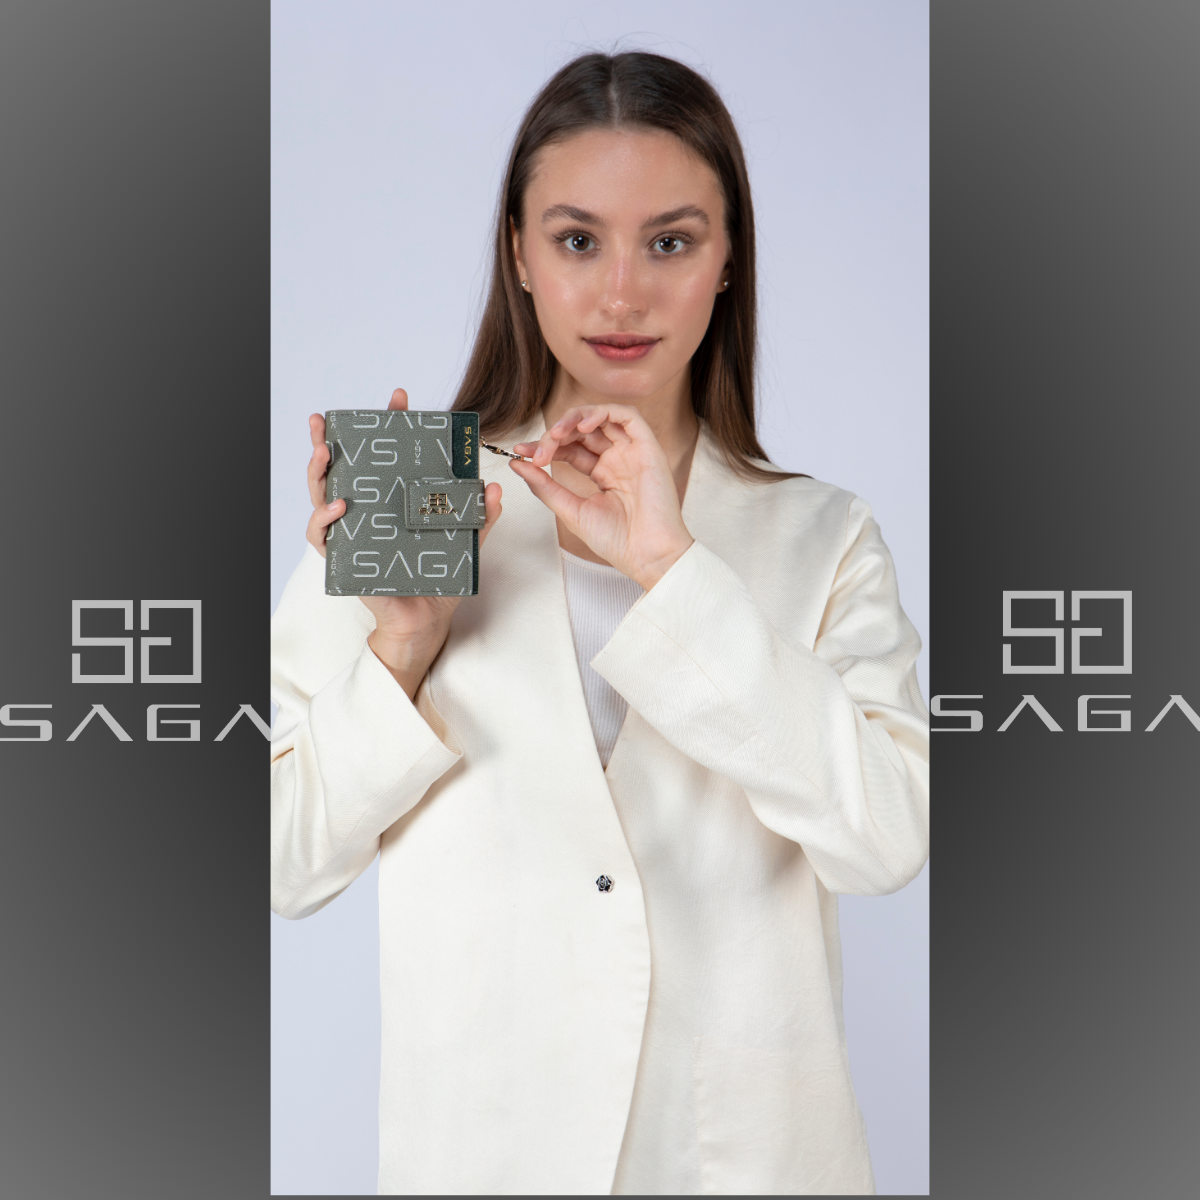 A luxurious and elegant microfiber wallet in a practical size, available in two colors